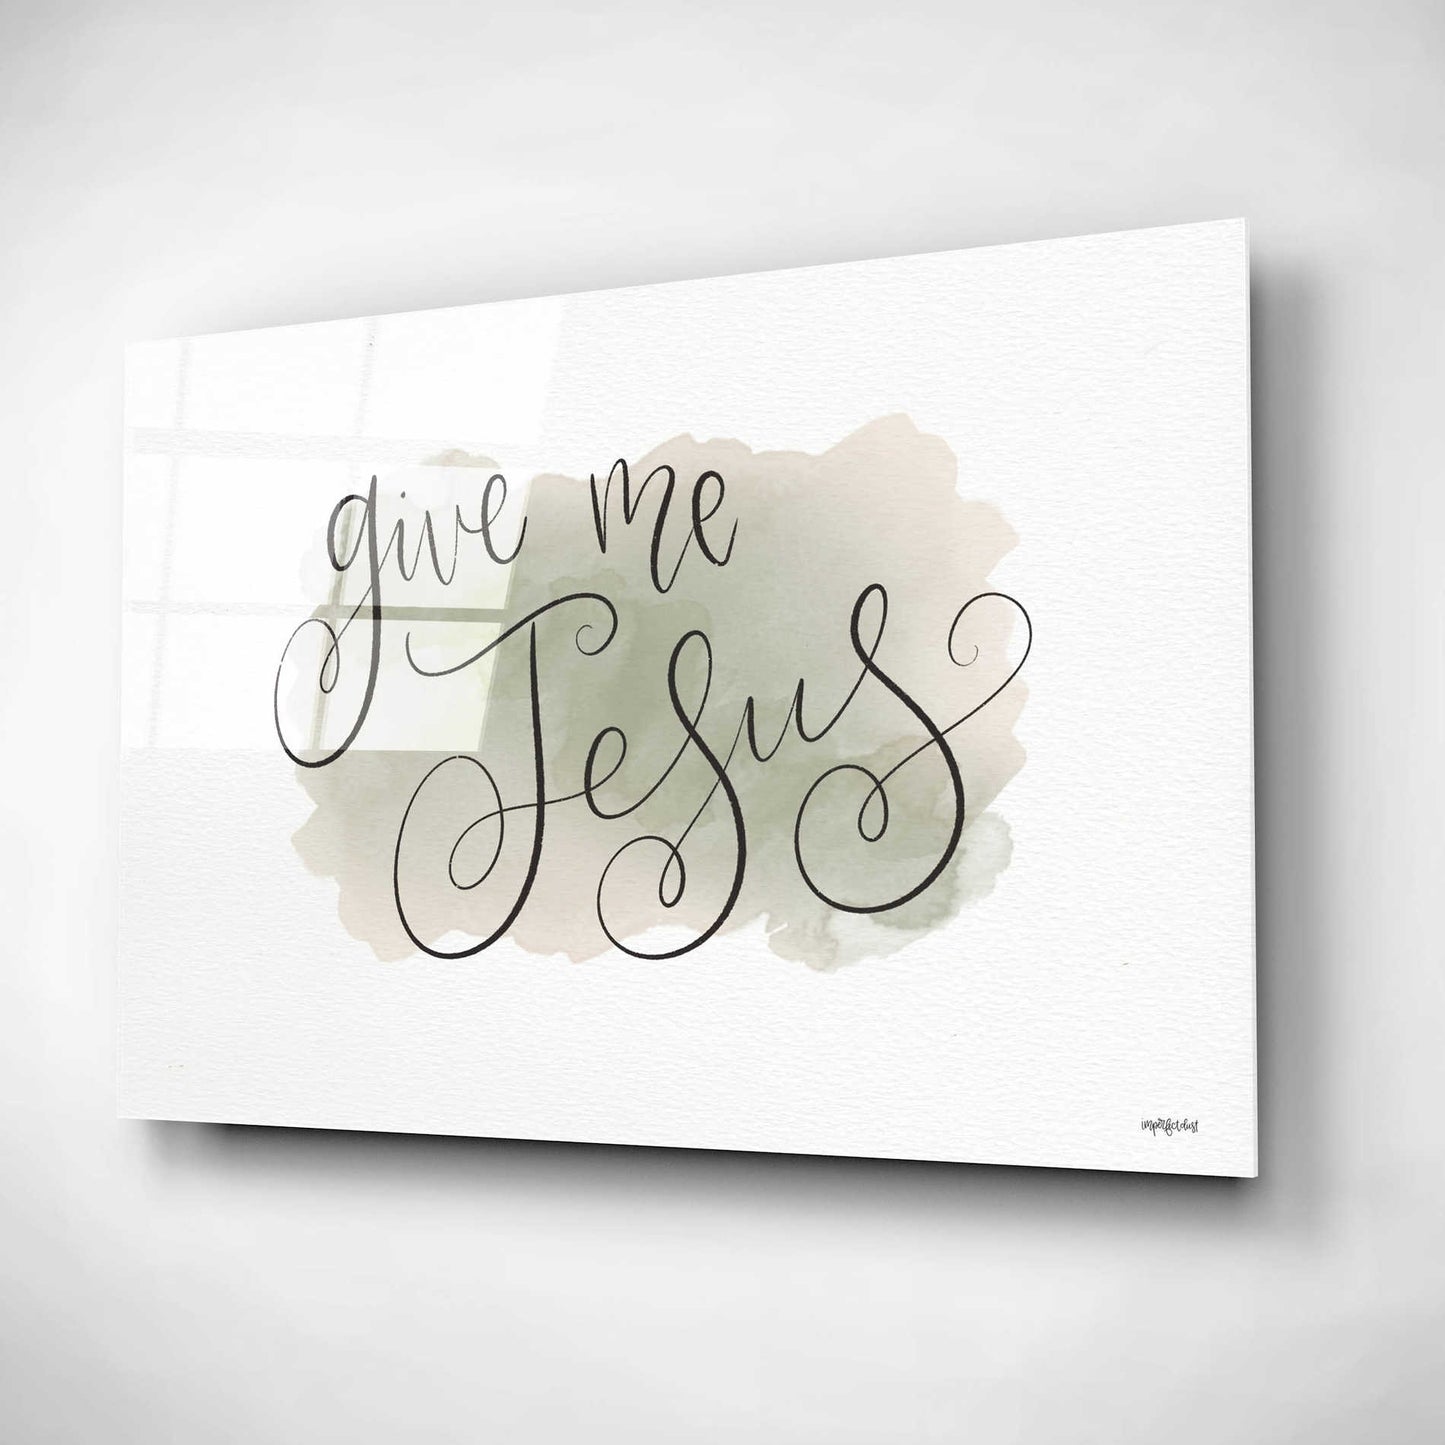 Epic Art 'Give Me Jesus' by Imperfect Dust, Acrylic Glass Wall Art,16x12